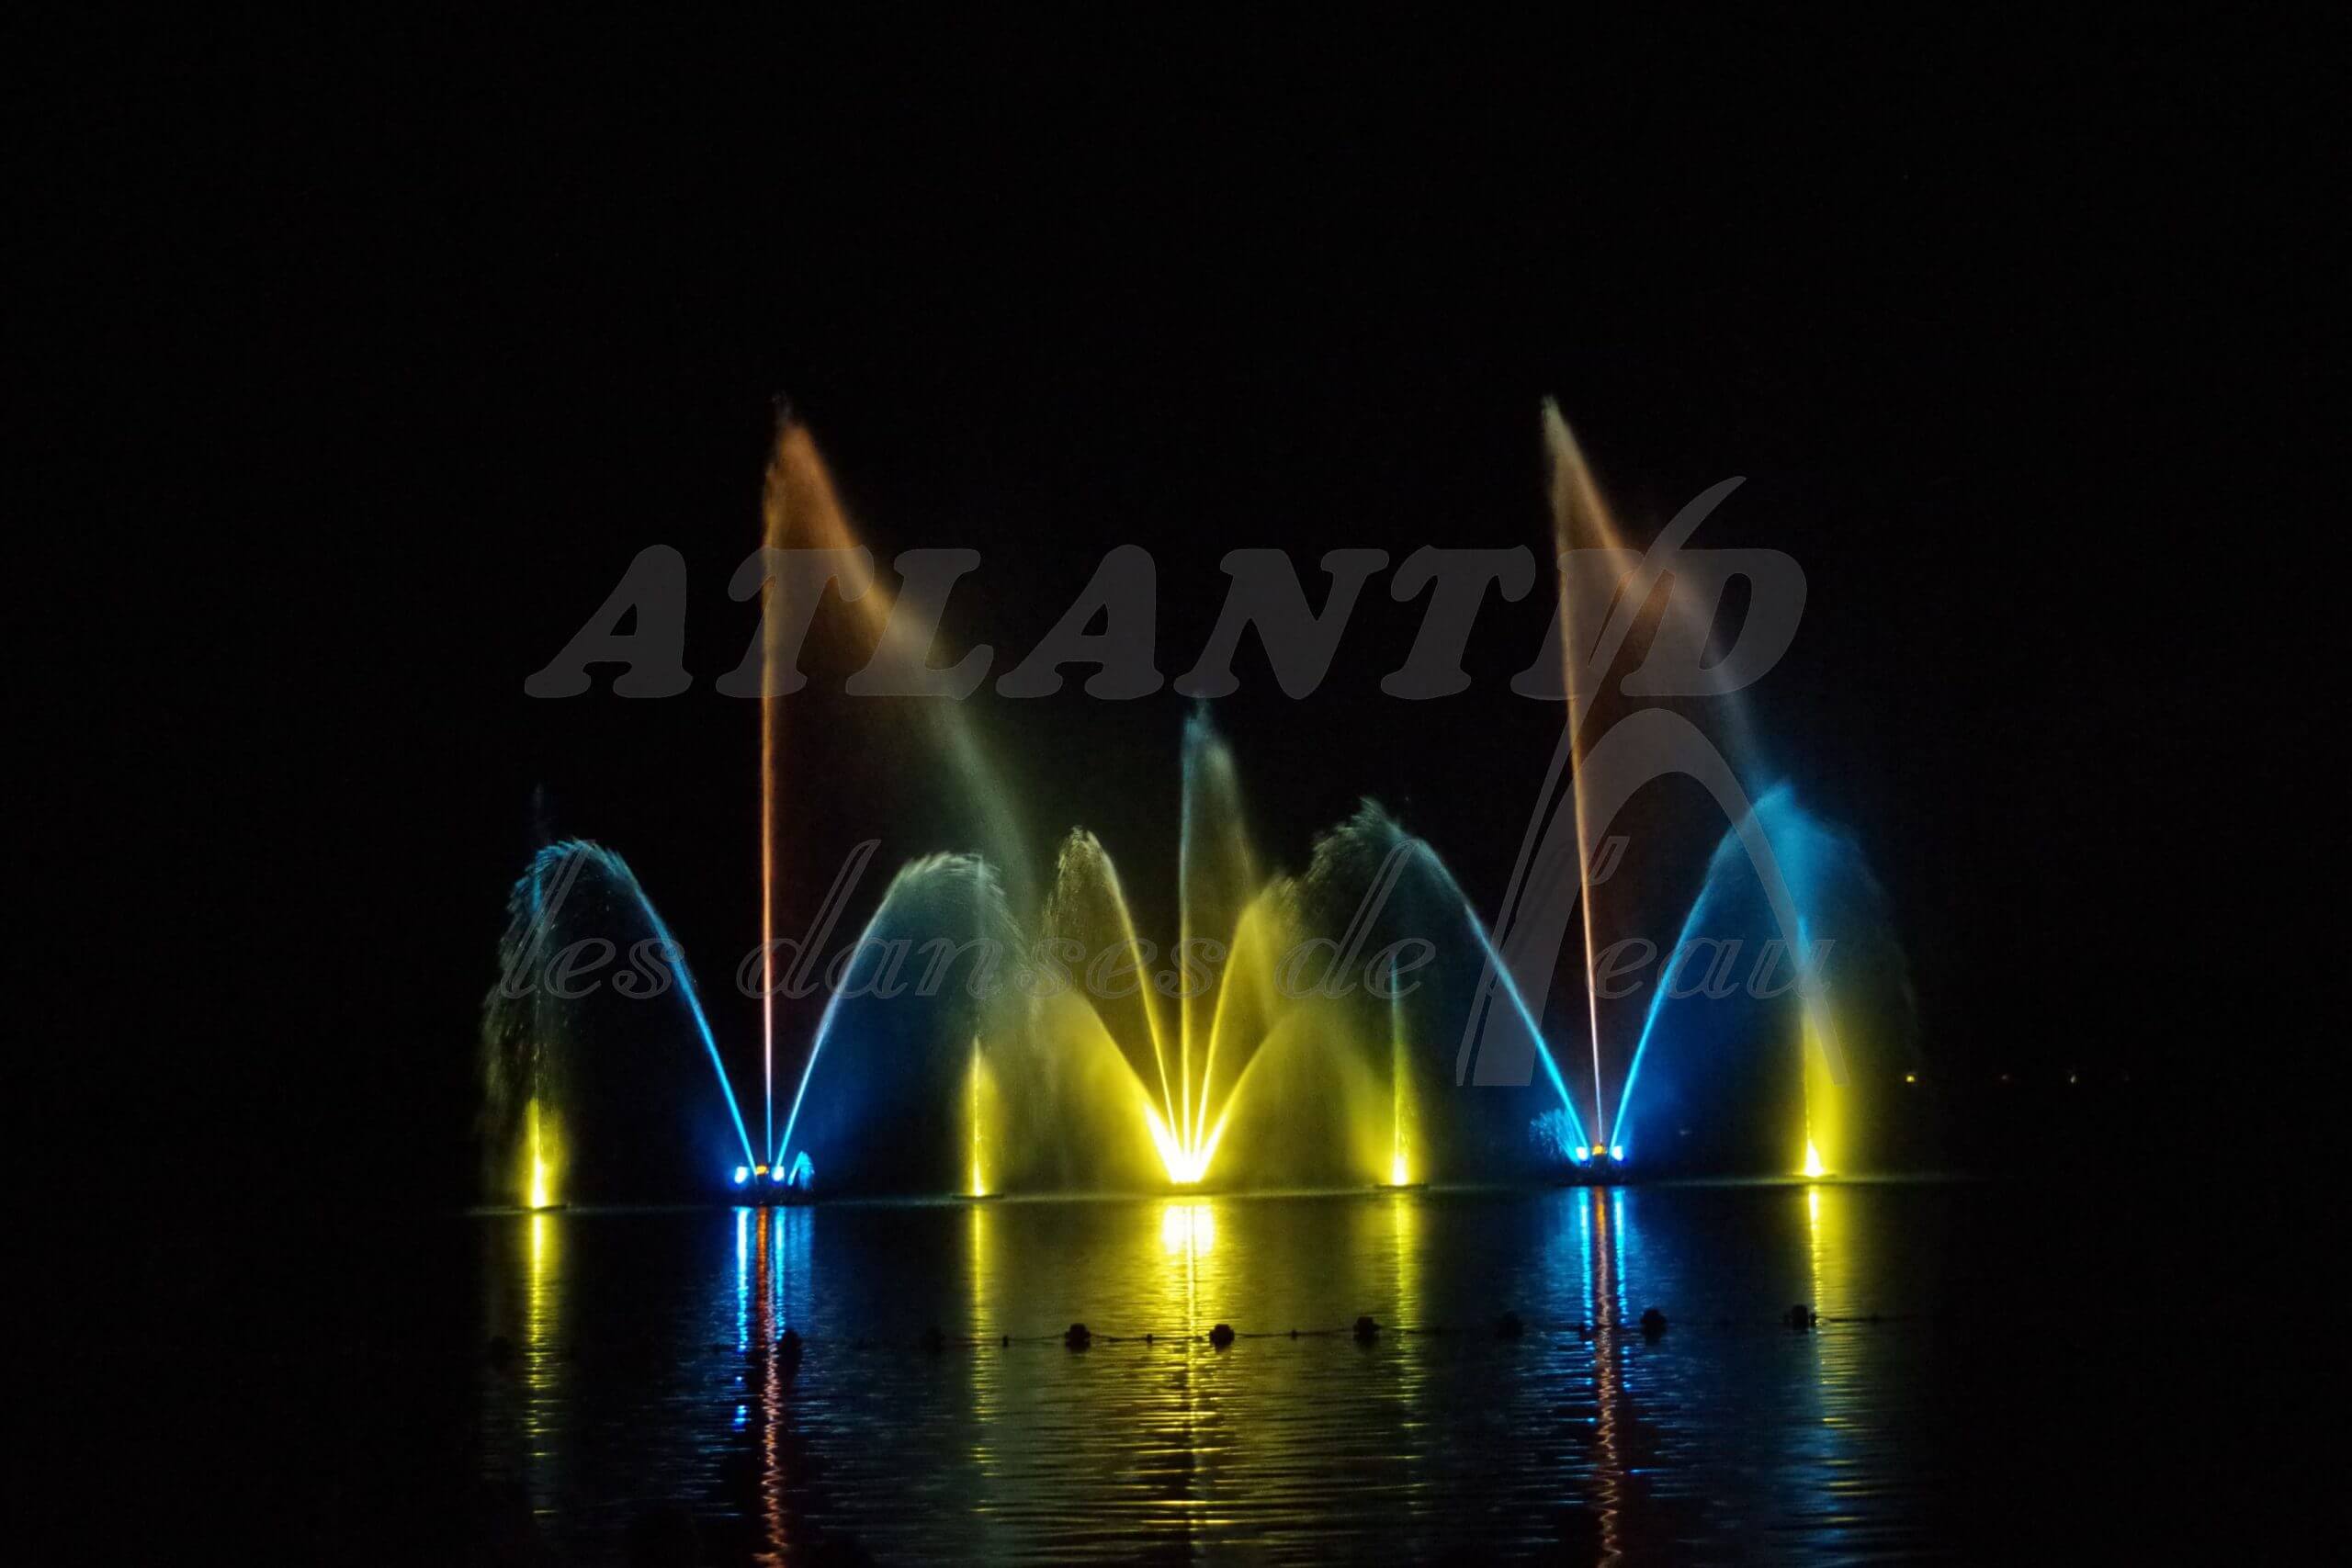 Atlantid - Other themes - Fountain made up of giant blue, orange and yellow water jets